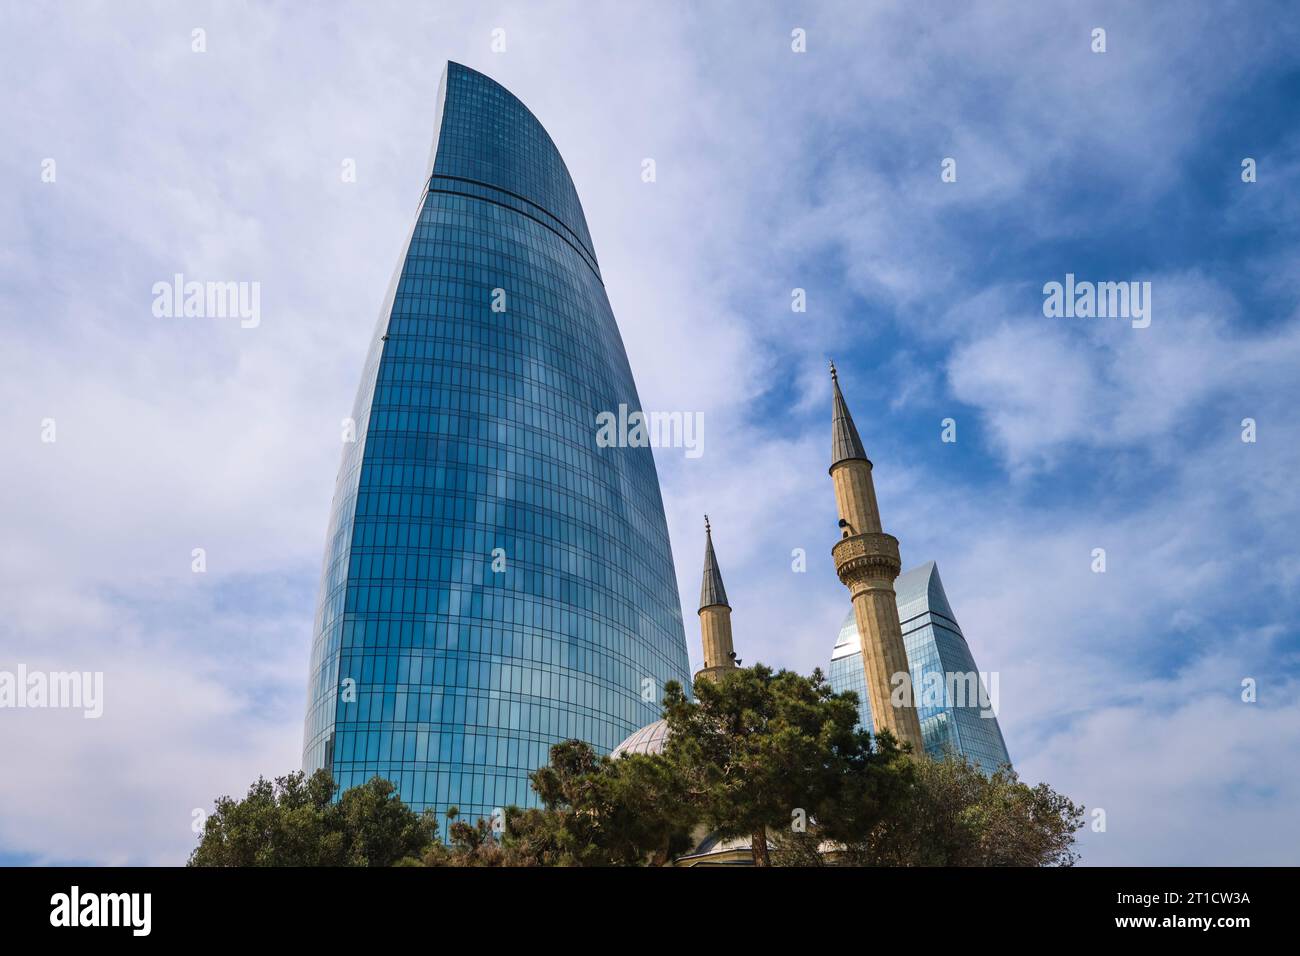 At the iconic, modern, blue glass Flame Towers, designed by HOK. The Alley of Martyrs Mosque in the foreground. In Baku, Azerbaijan. Stock Photo